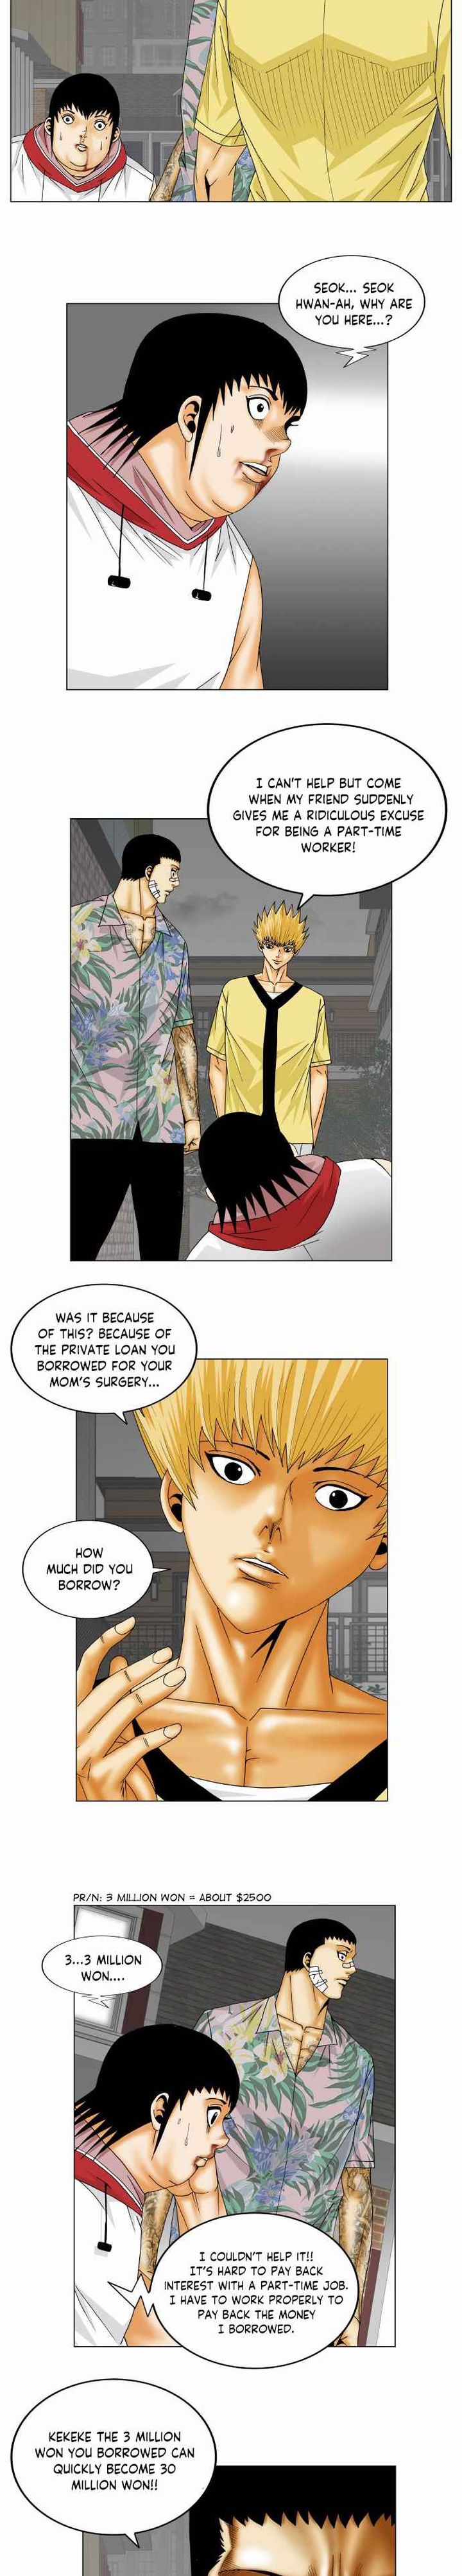 Ultimate Legend Kang Hae Hyo Chapter 156 Page 2